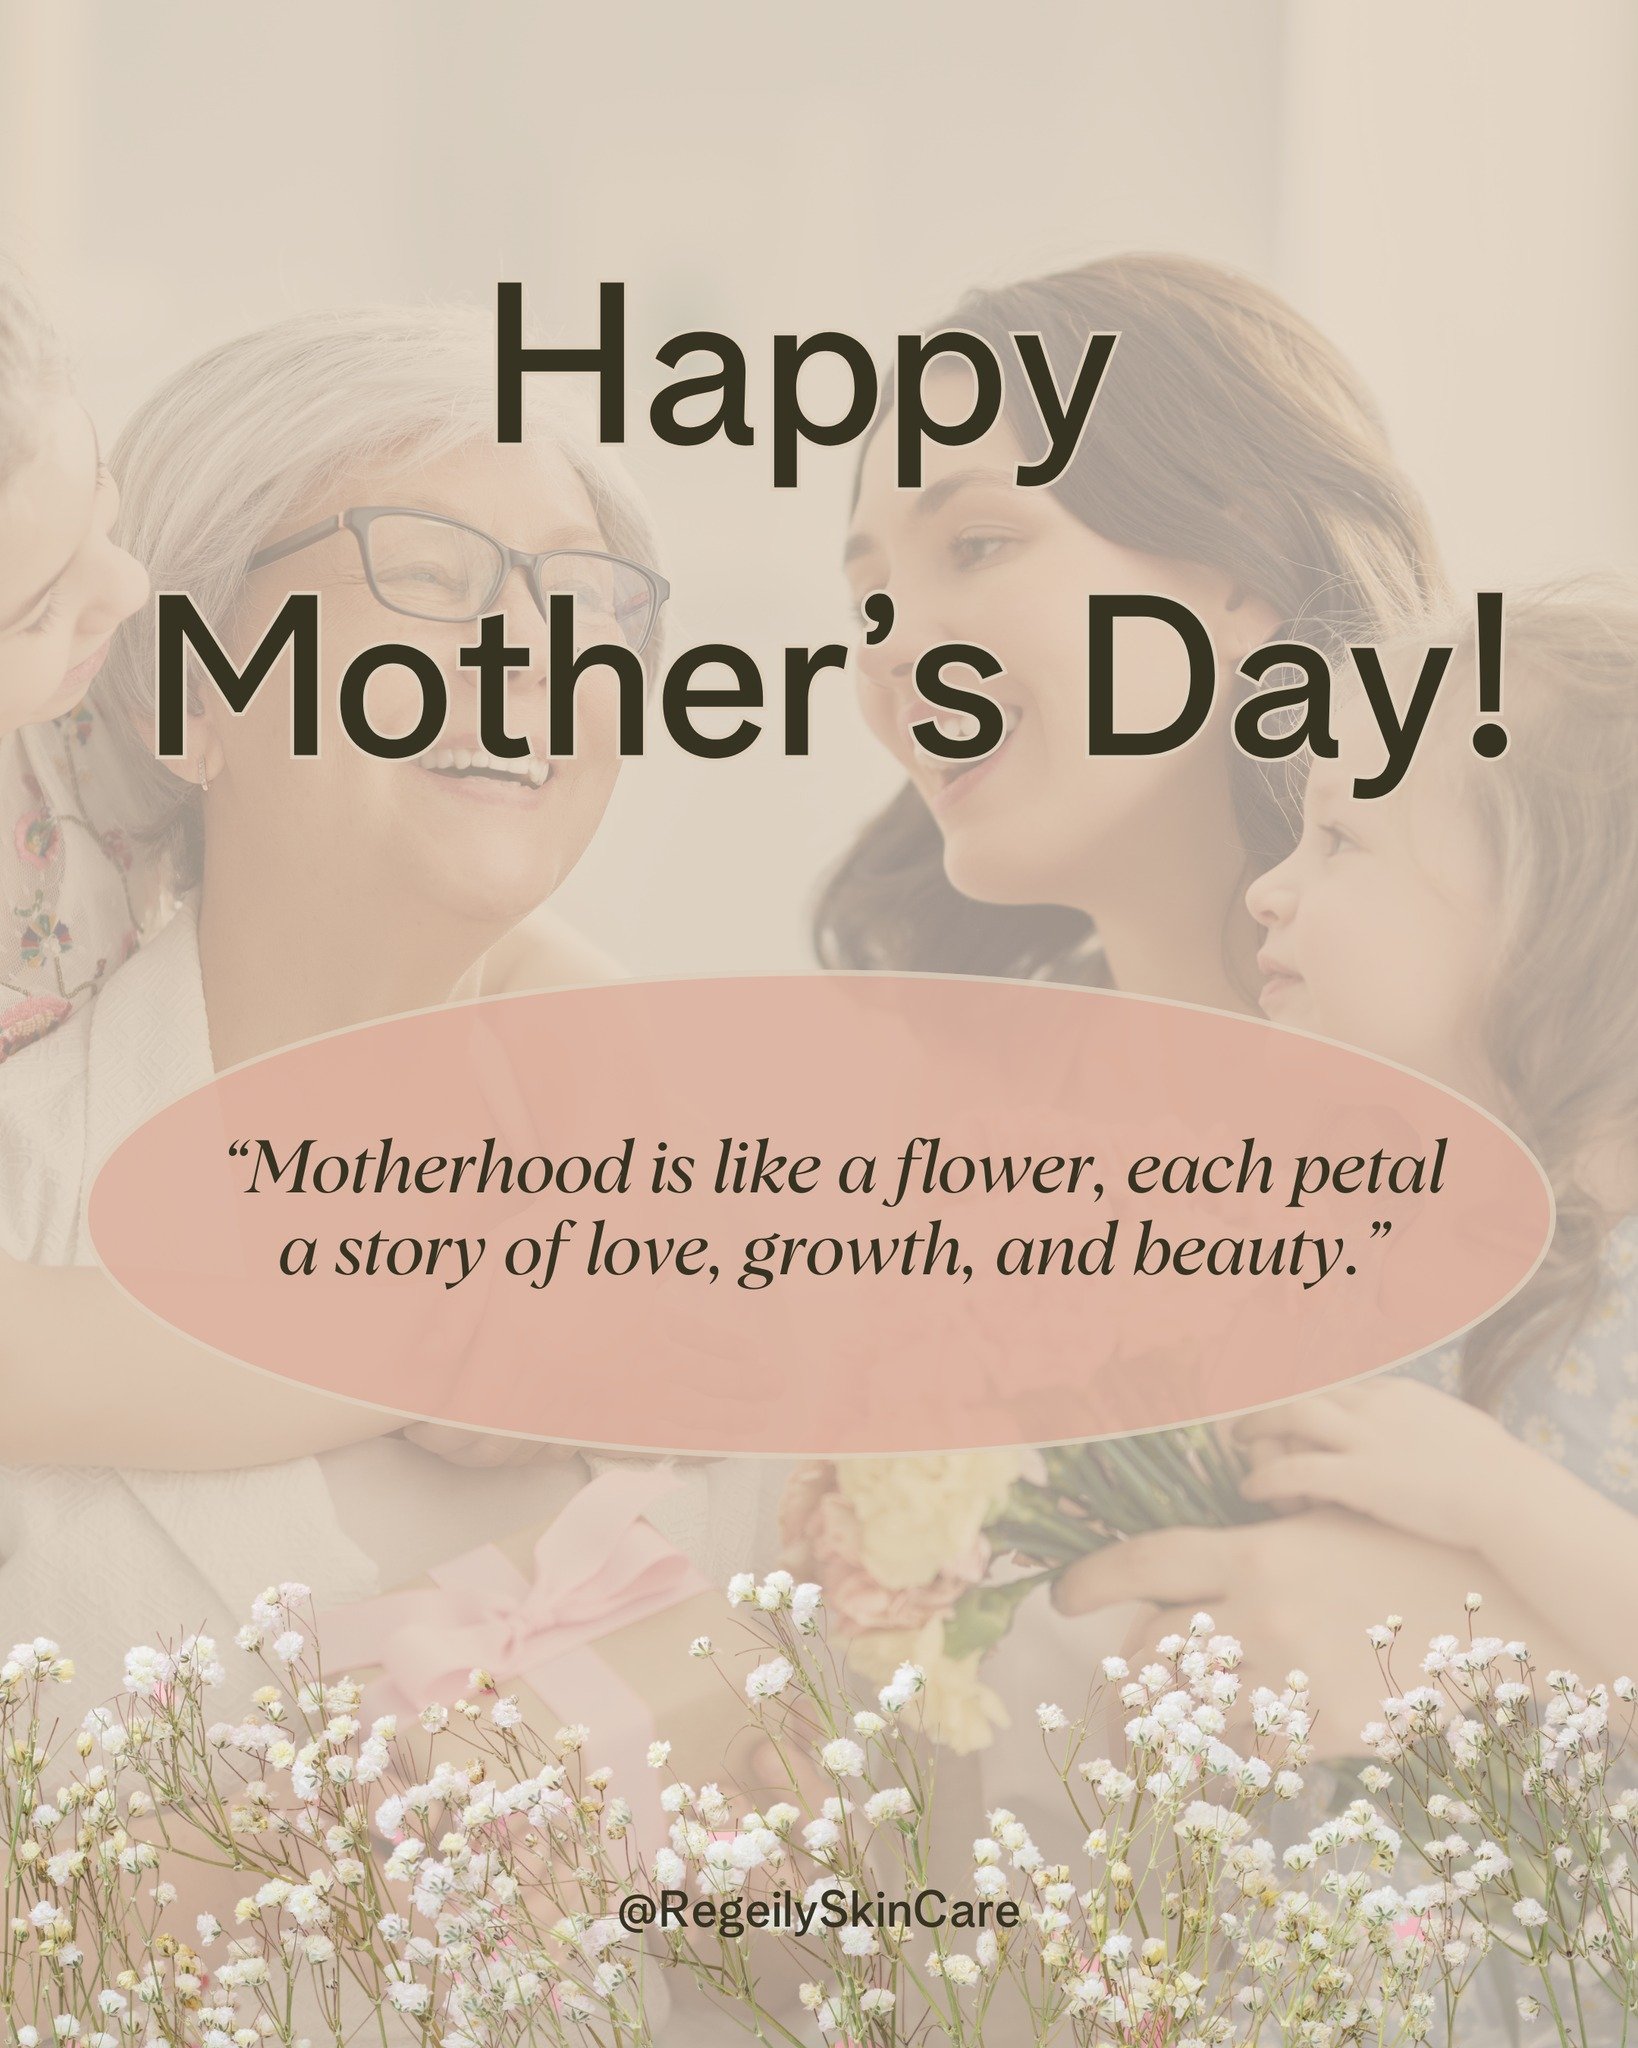 Happy Mother's Day to all the incredible moms out there! 

🌸 Just like a flower, motherhood is a journey filled with stories of love, growth, and beauty. At Regeily, we celebrate this special bond, knowing firsthand the joys and challenges of being 